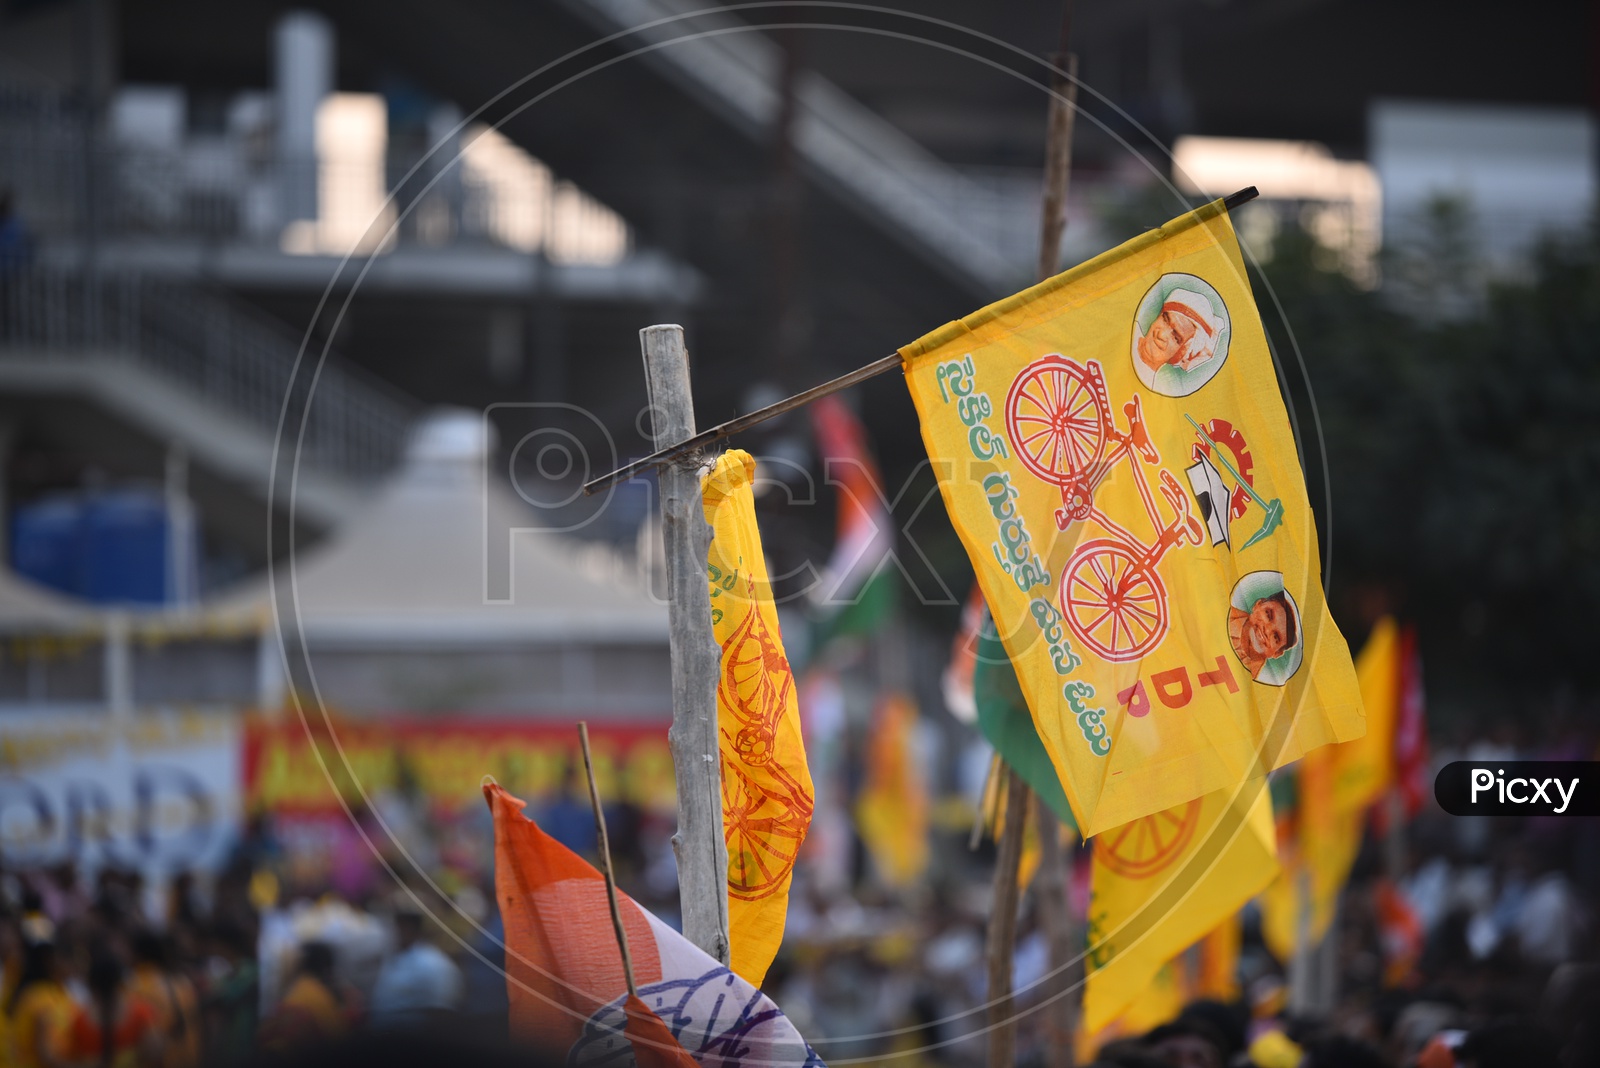 TDP Supporters In a Public Meeting / TDP Party Flags / People Cheering TDP in Public Meetings / Election Campaigns By MAHAKUTAMI in Telangana